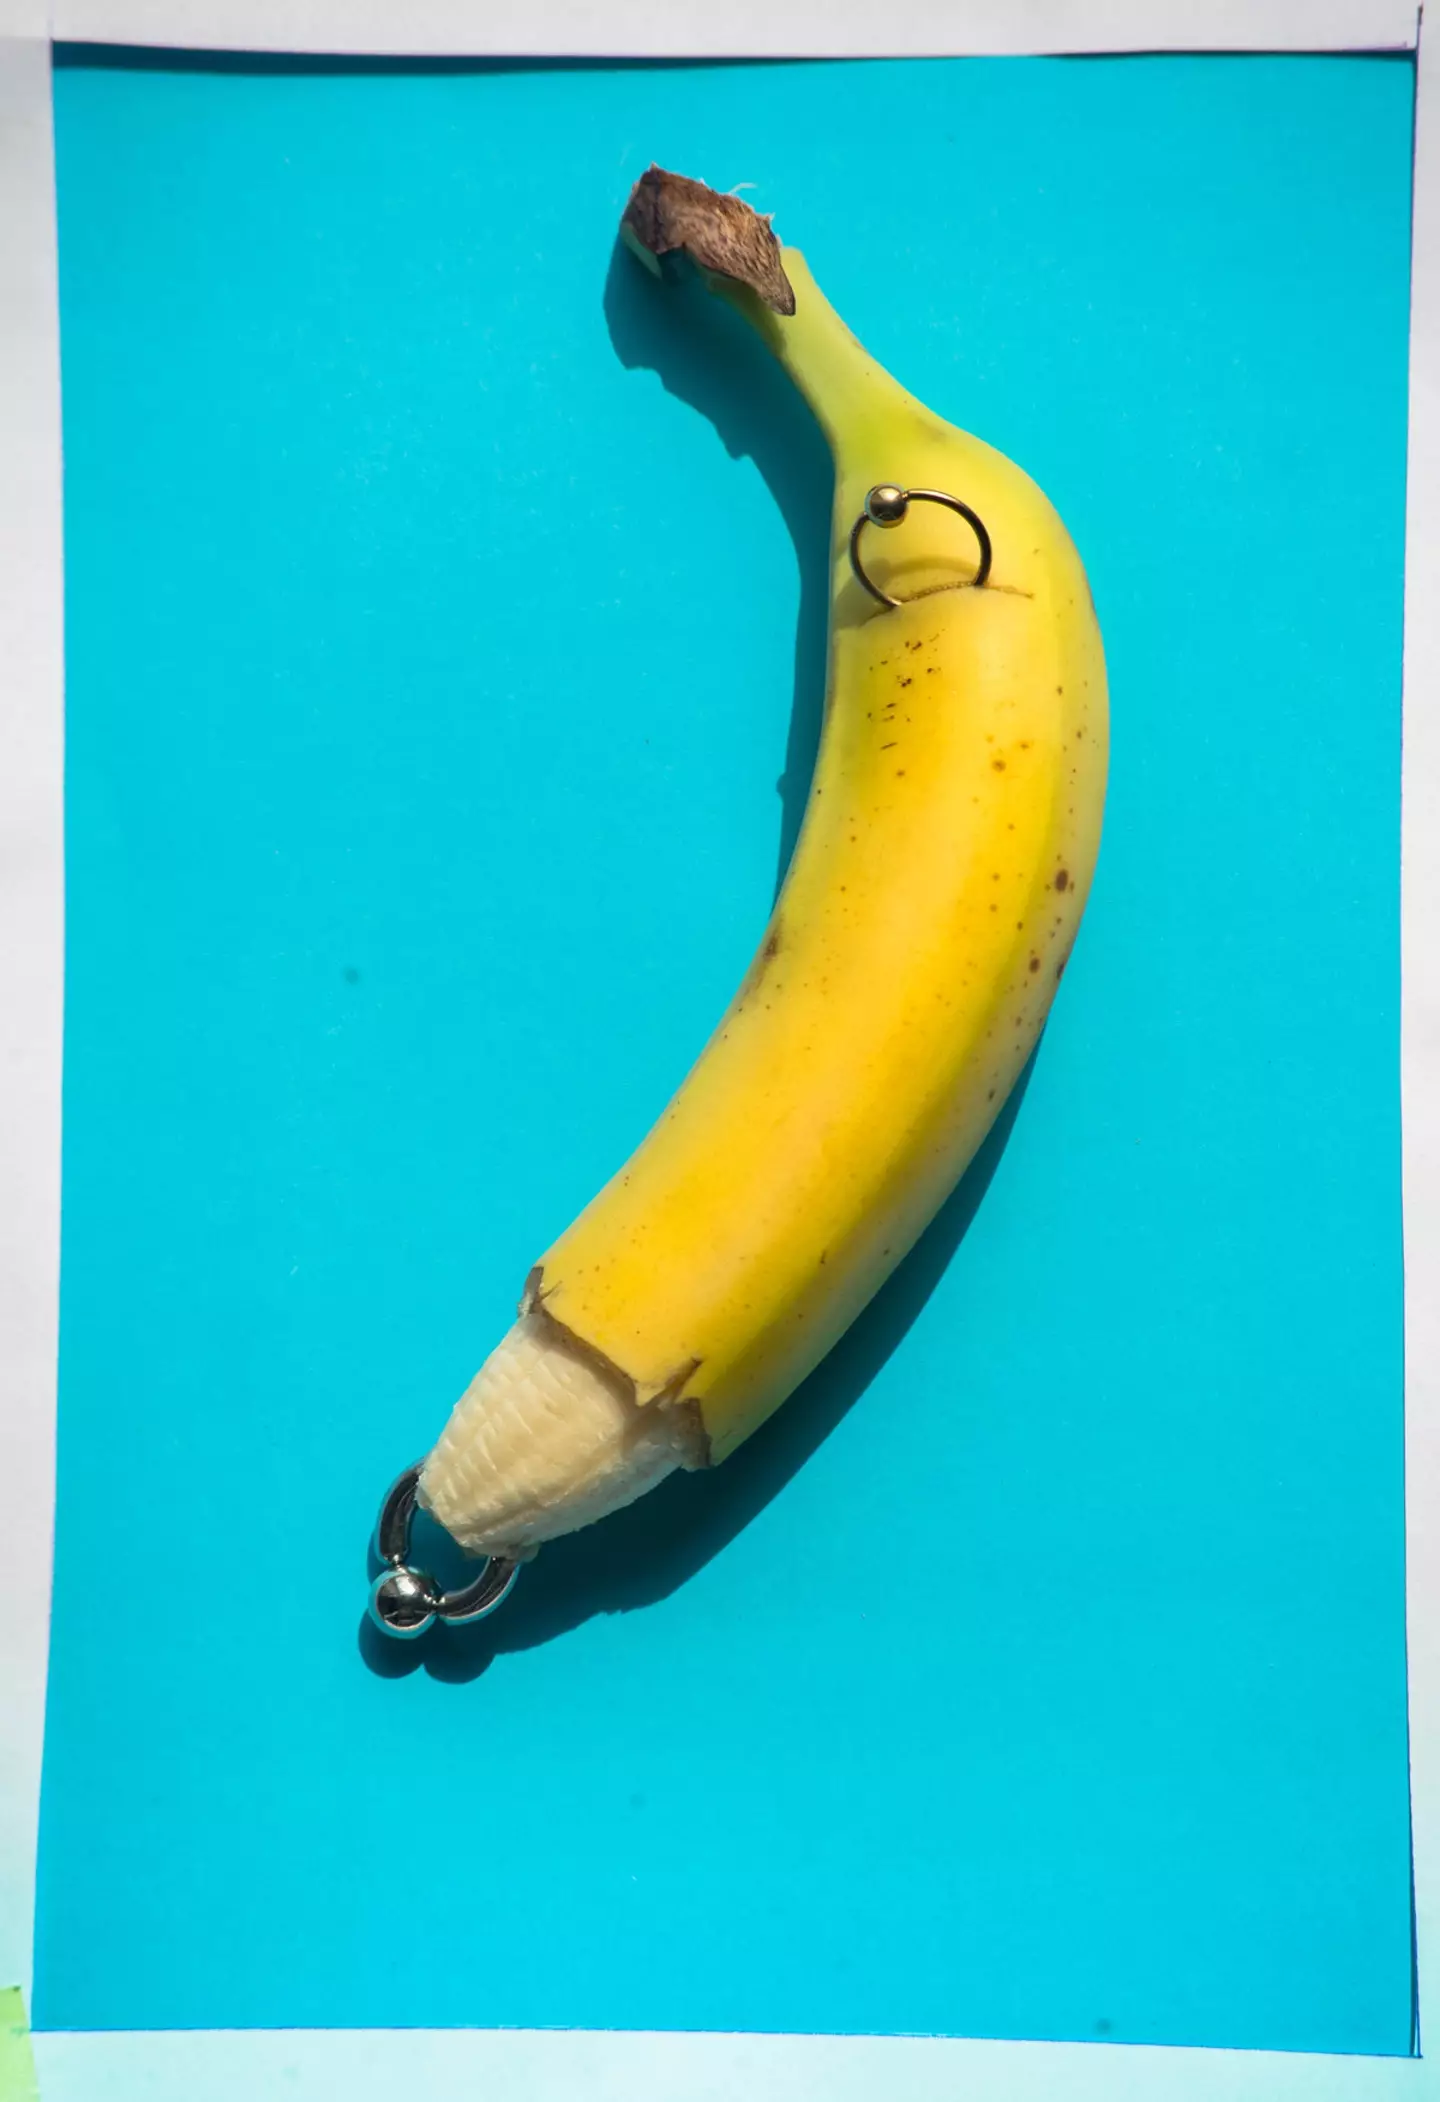 Please appreciate that the banana represents something else. (Getty Stock Photo)